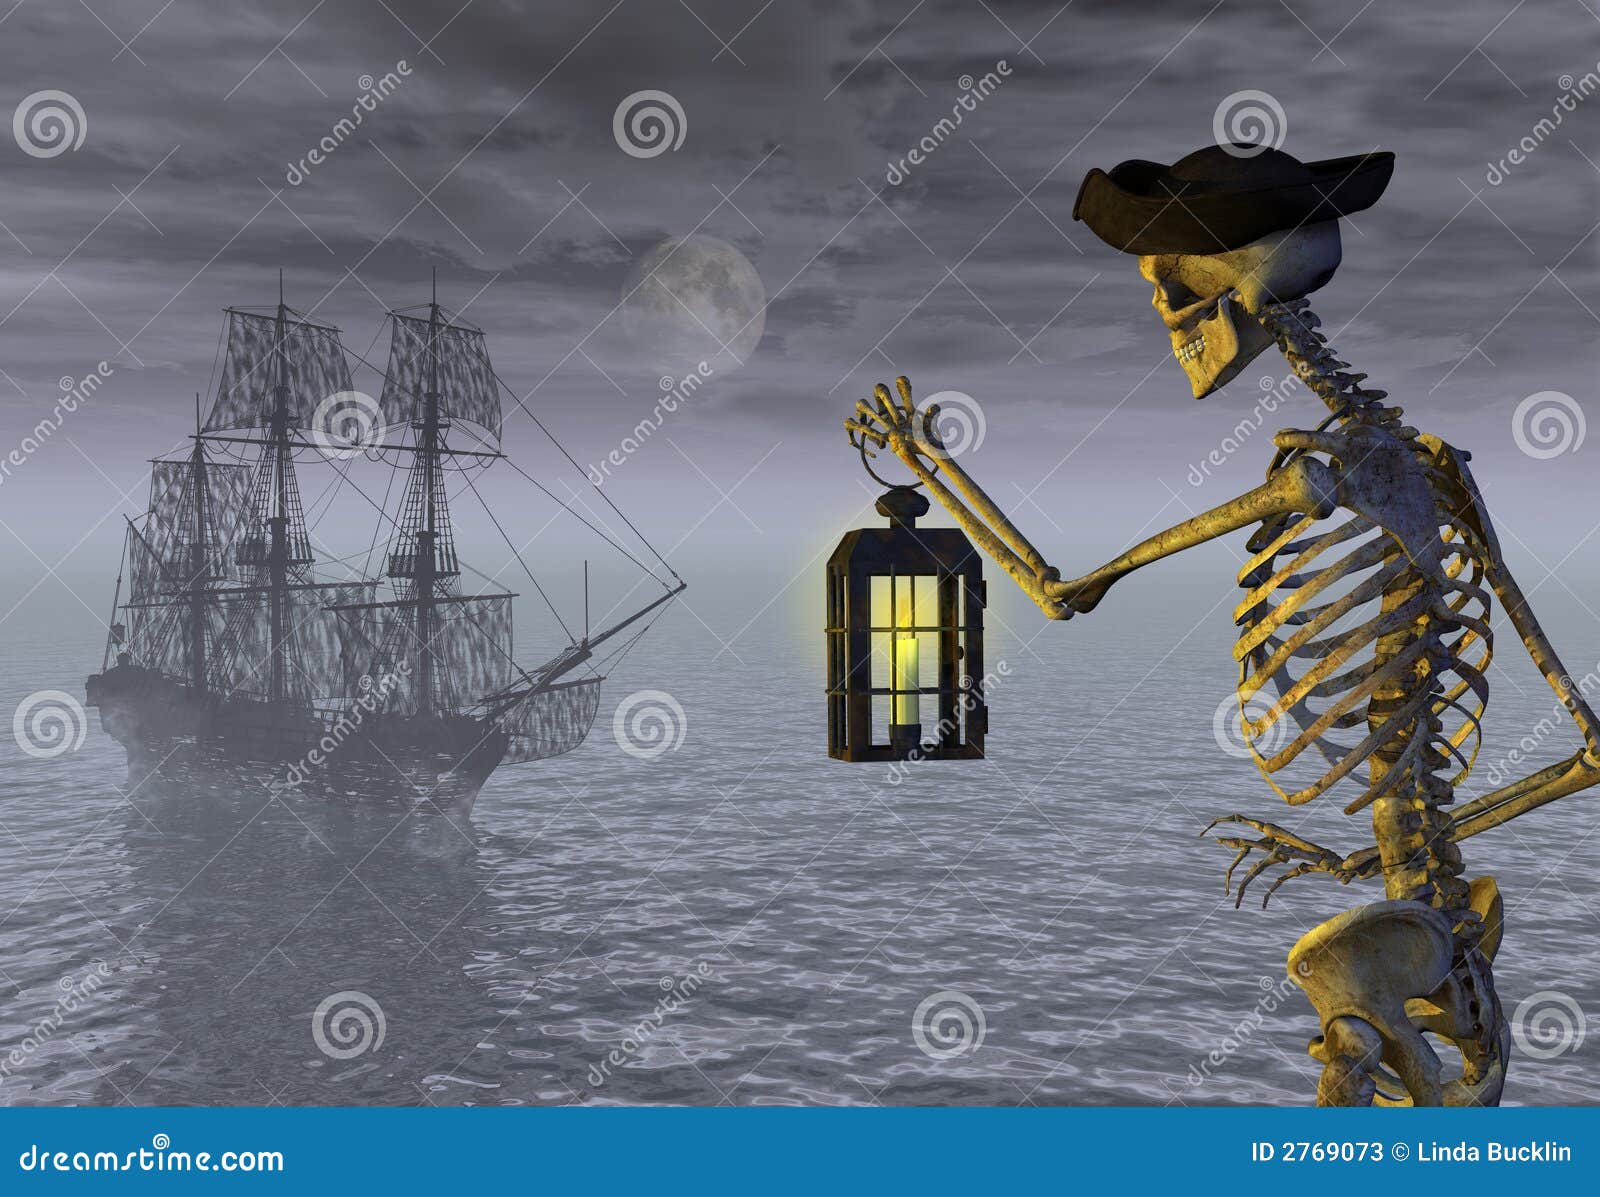 Ghost Pirate Ship Stock Illustrations 386 Ghost Pirate Ship Stock Illustrations Vectors Clipart Dreamstime